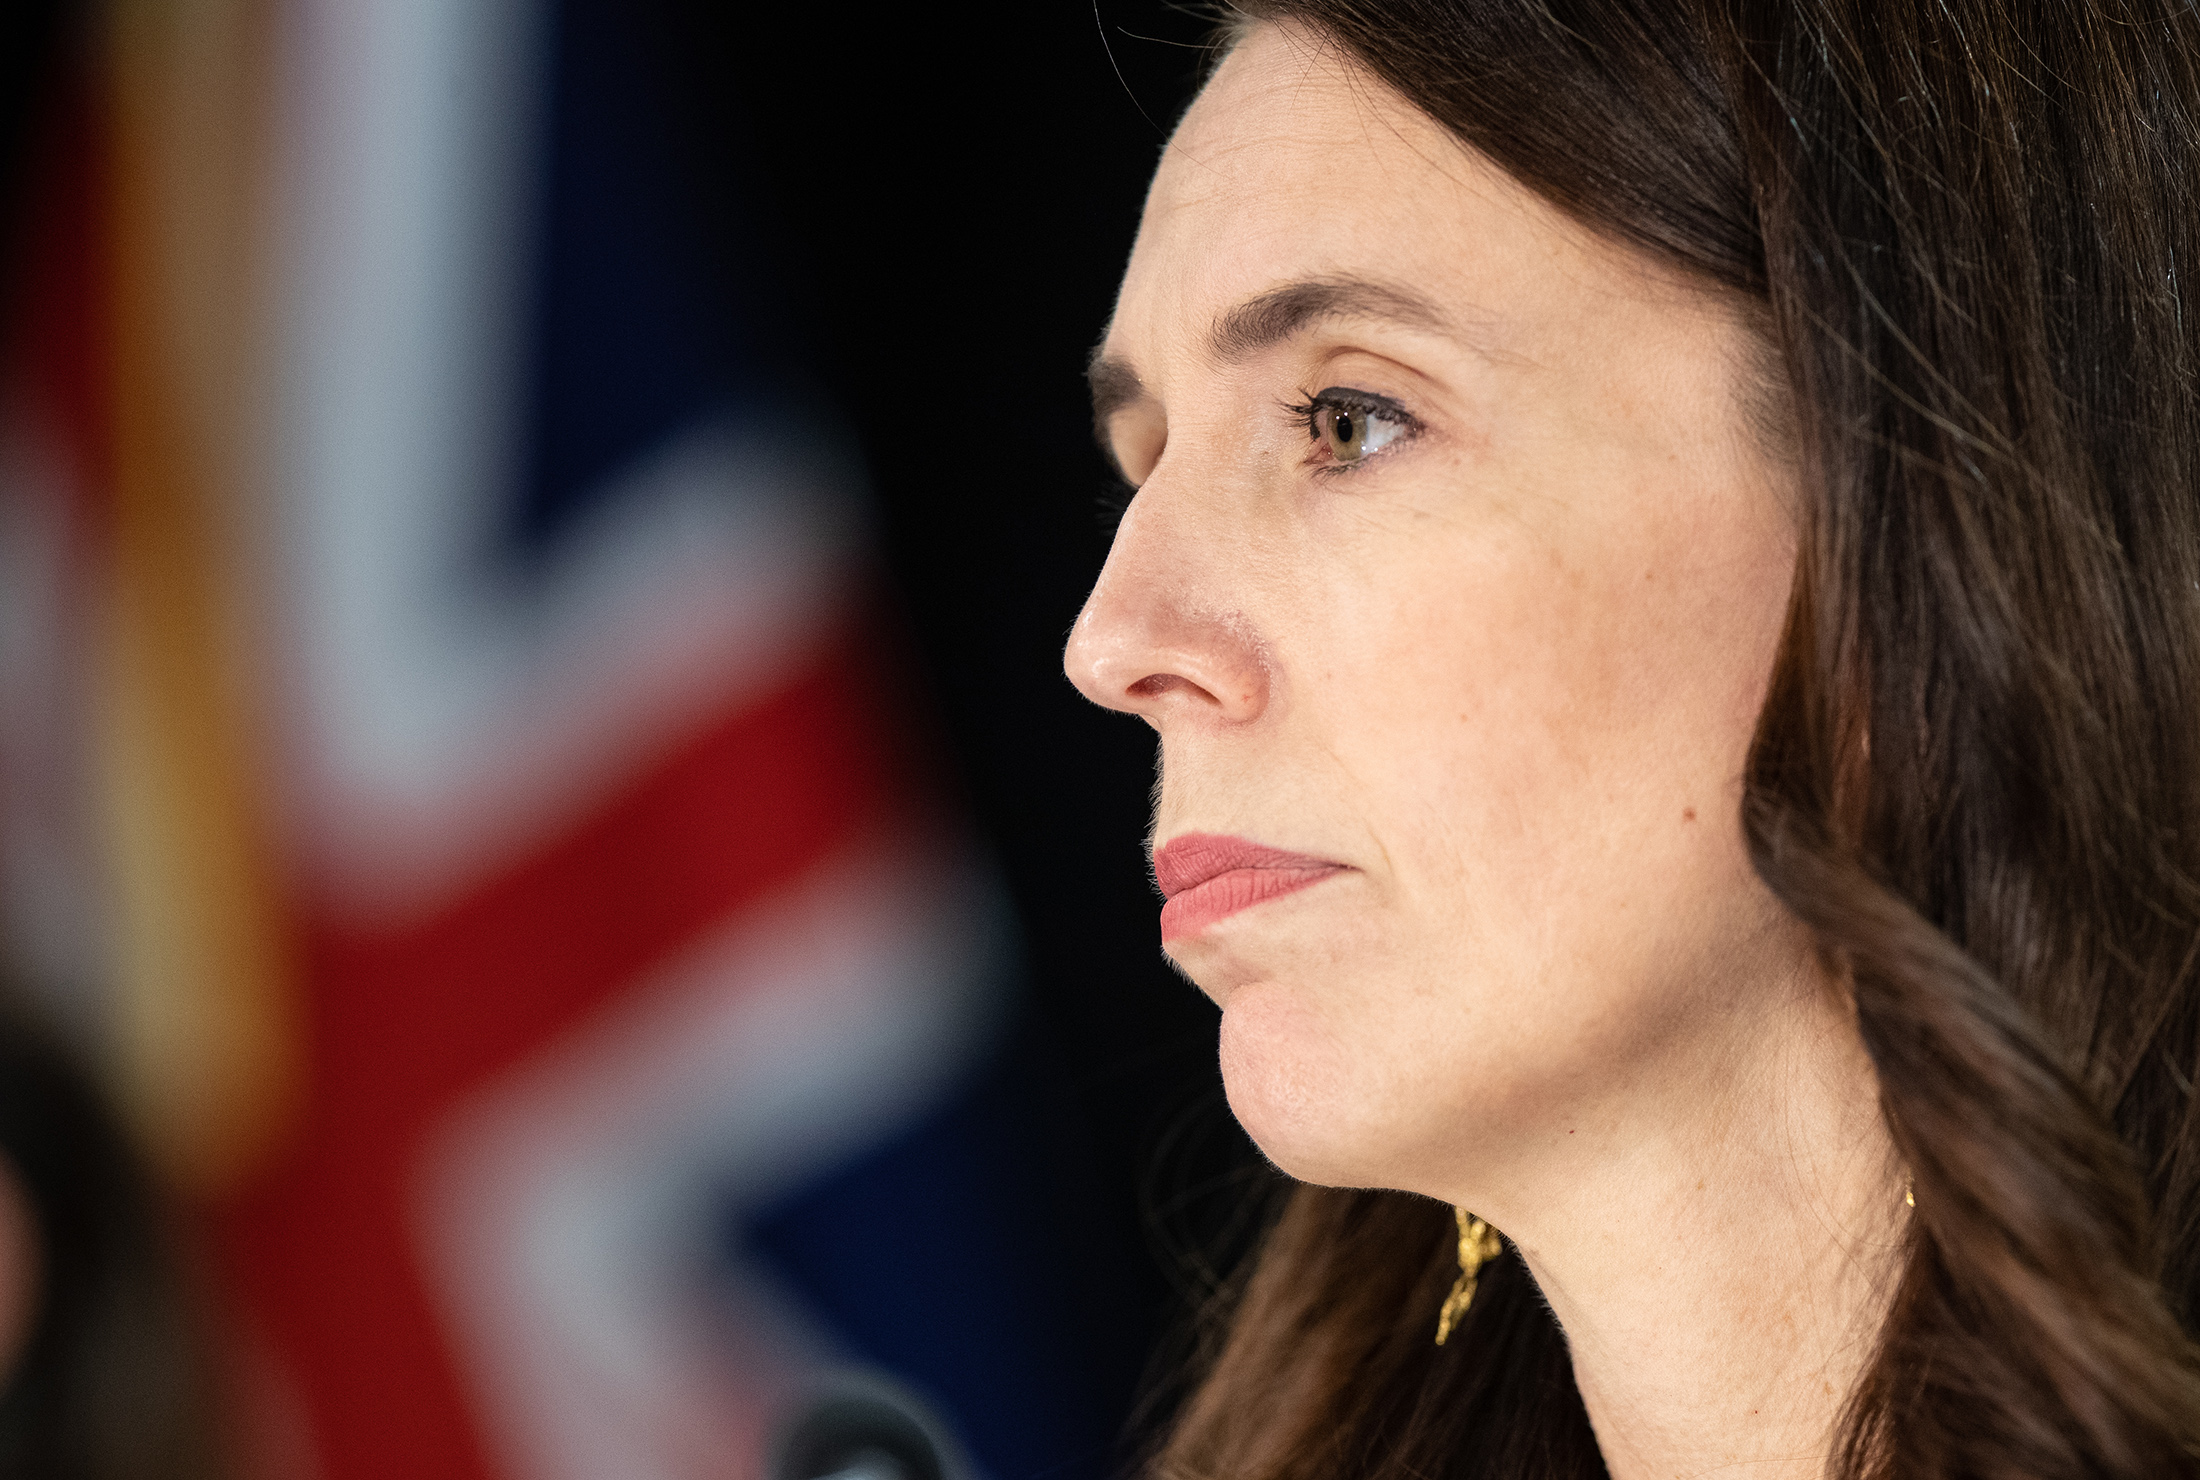 New Zealand's Christopher Luxon Is Optimistic New Government to Form Next  Week - Bloomberg